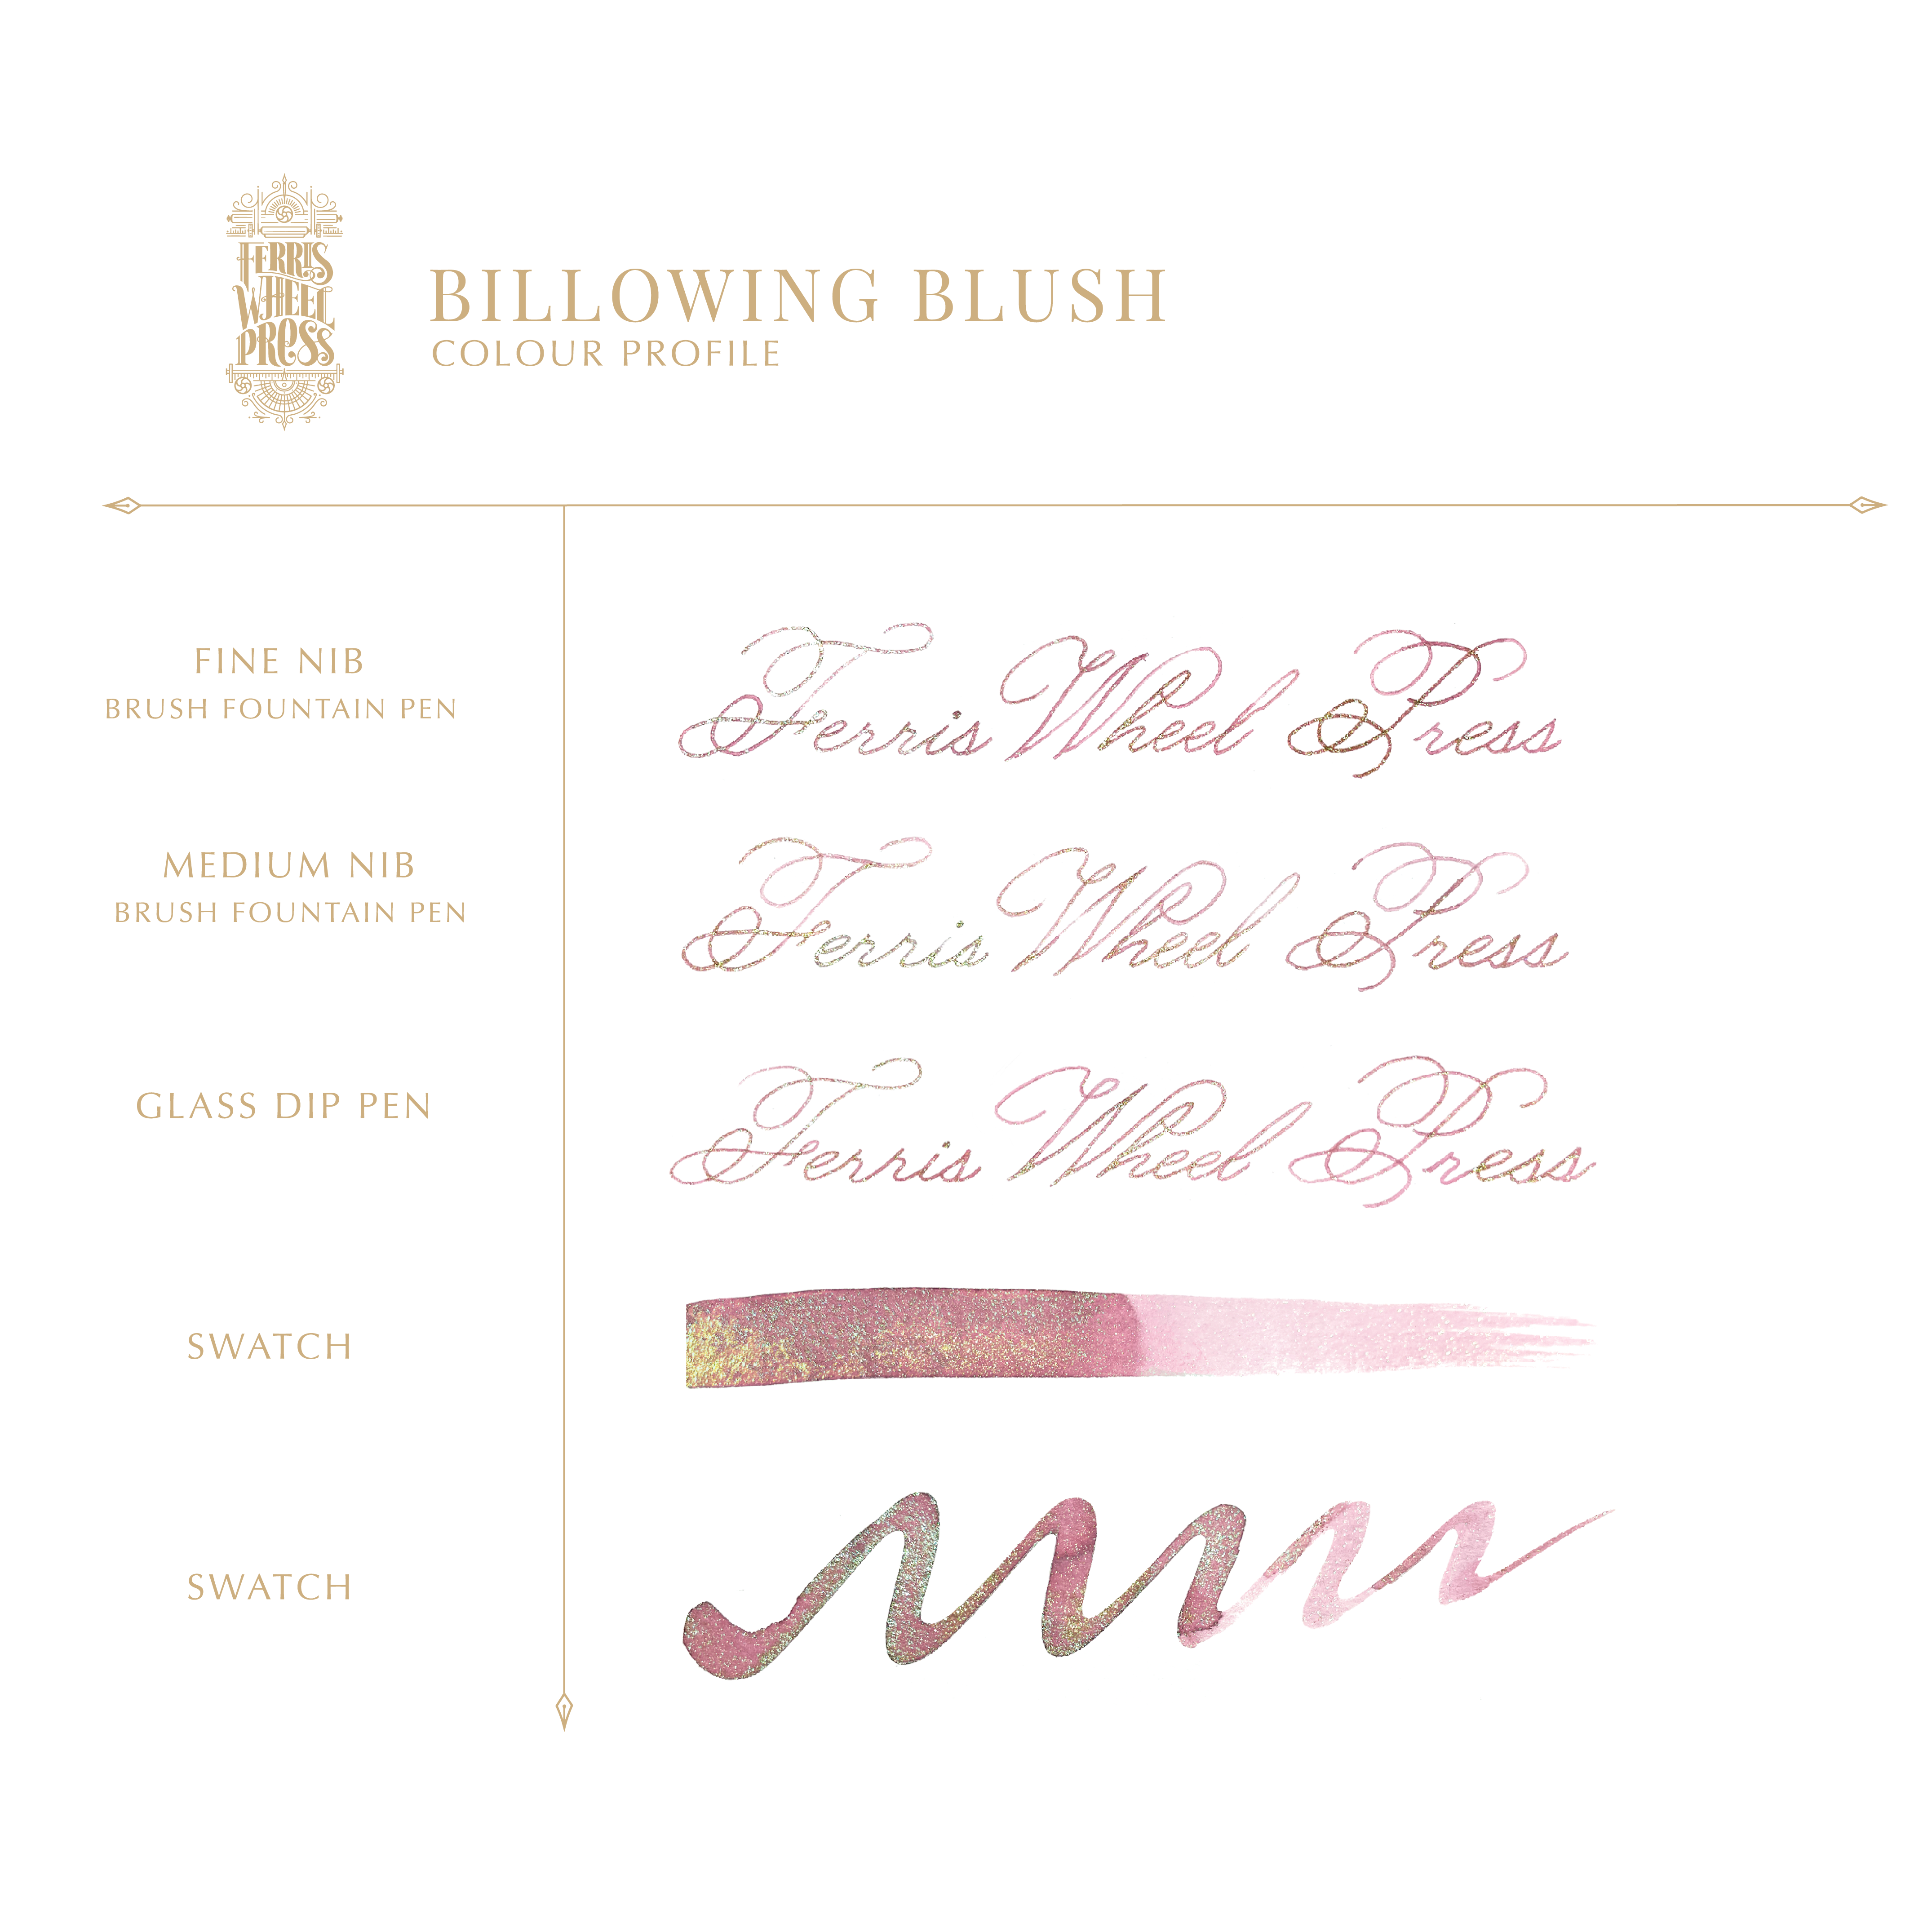 The Beauty and the Beast |  Billowing Blush